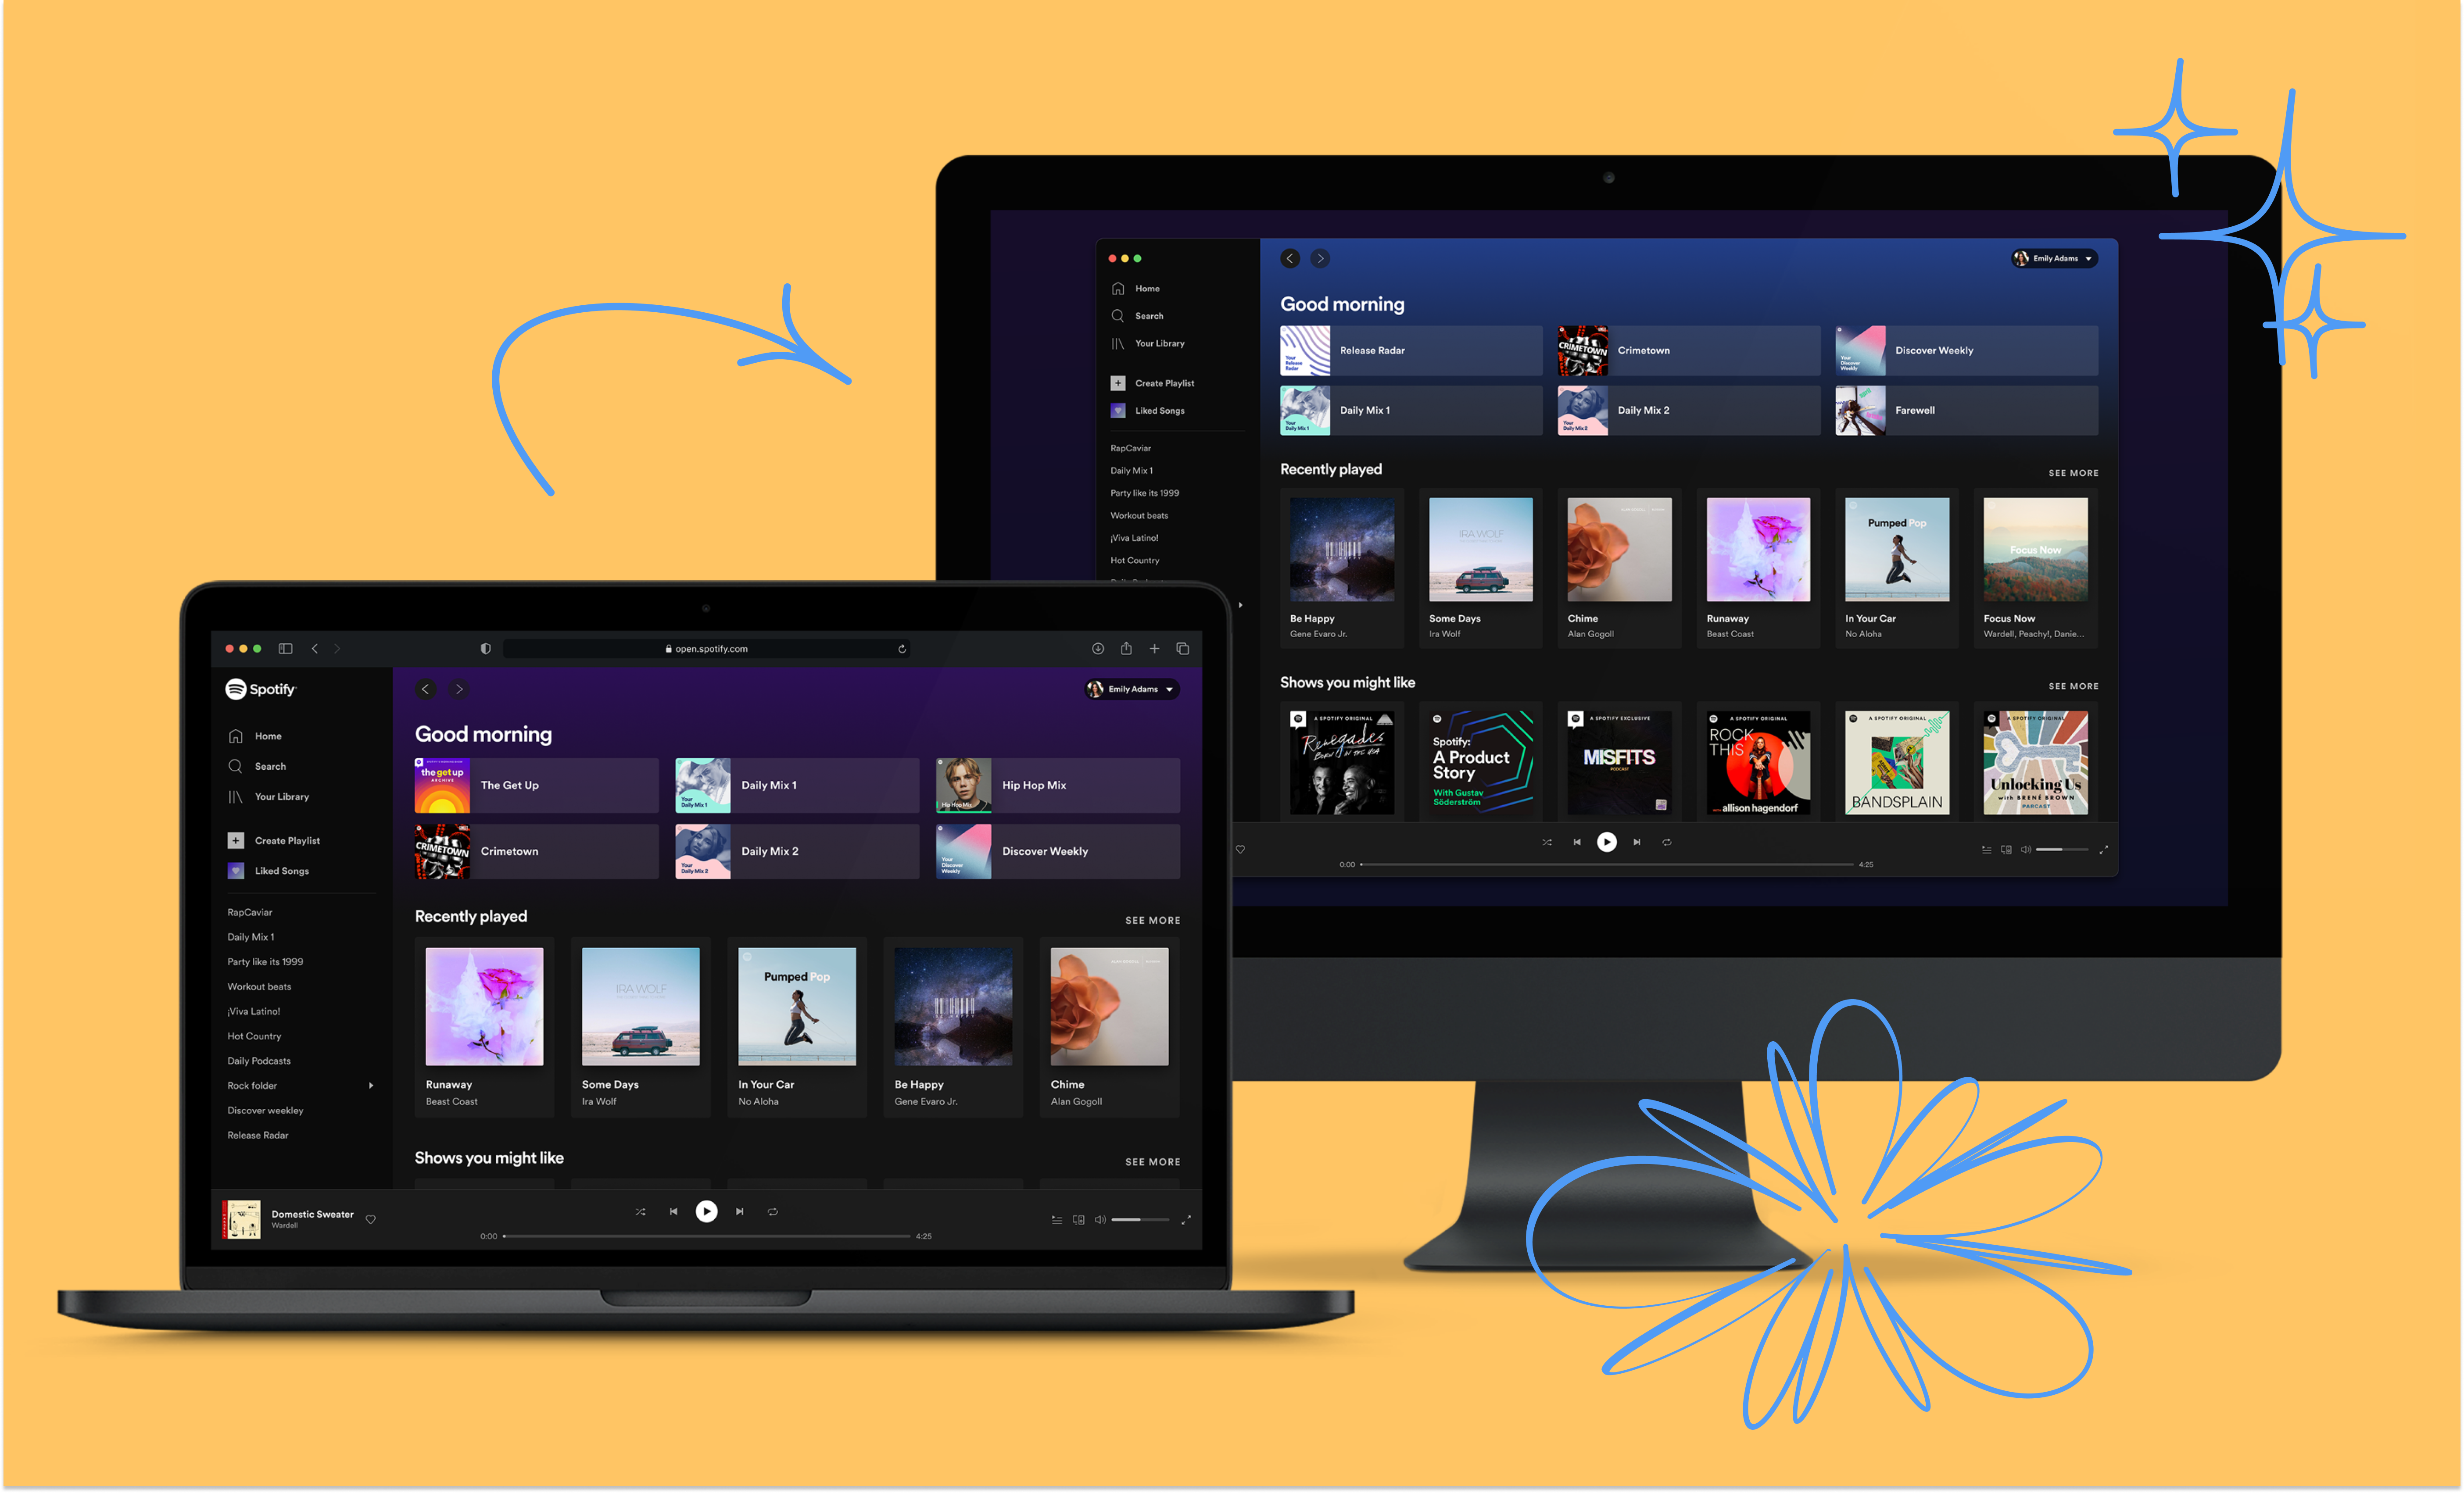 Spotify web and desktop get huge refresh – here are the key